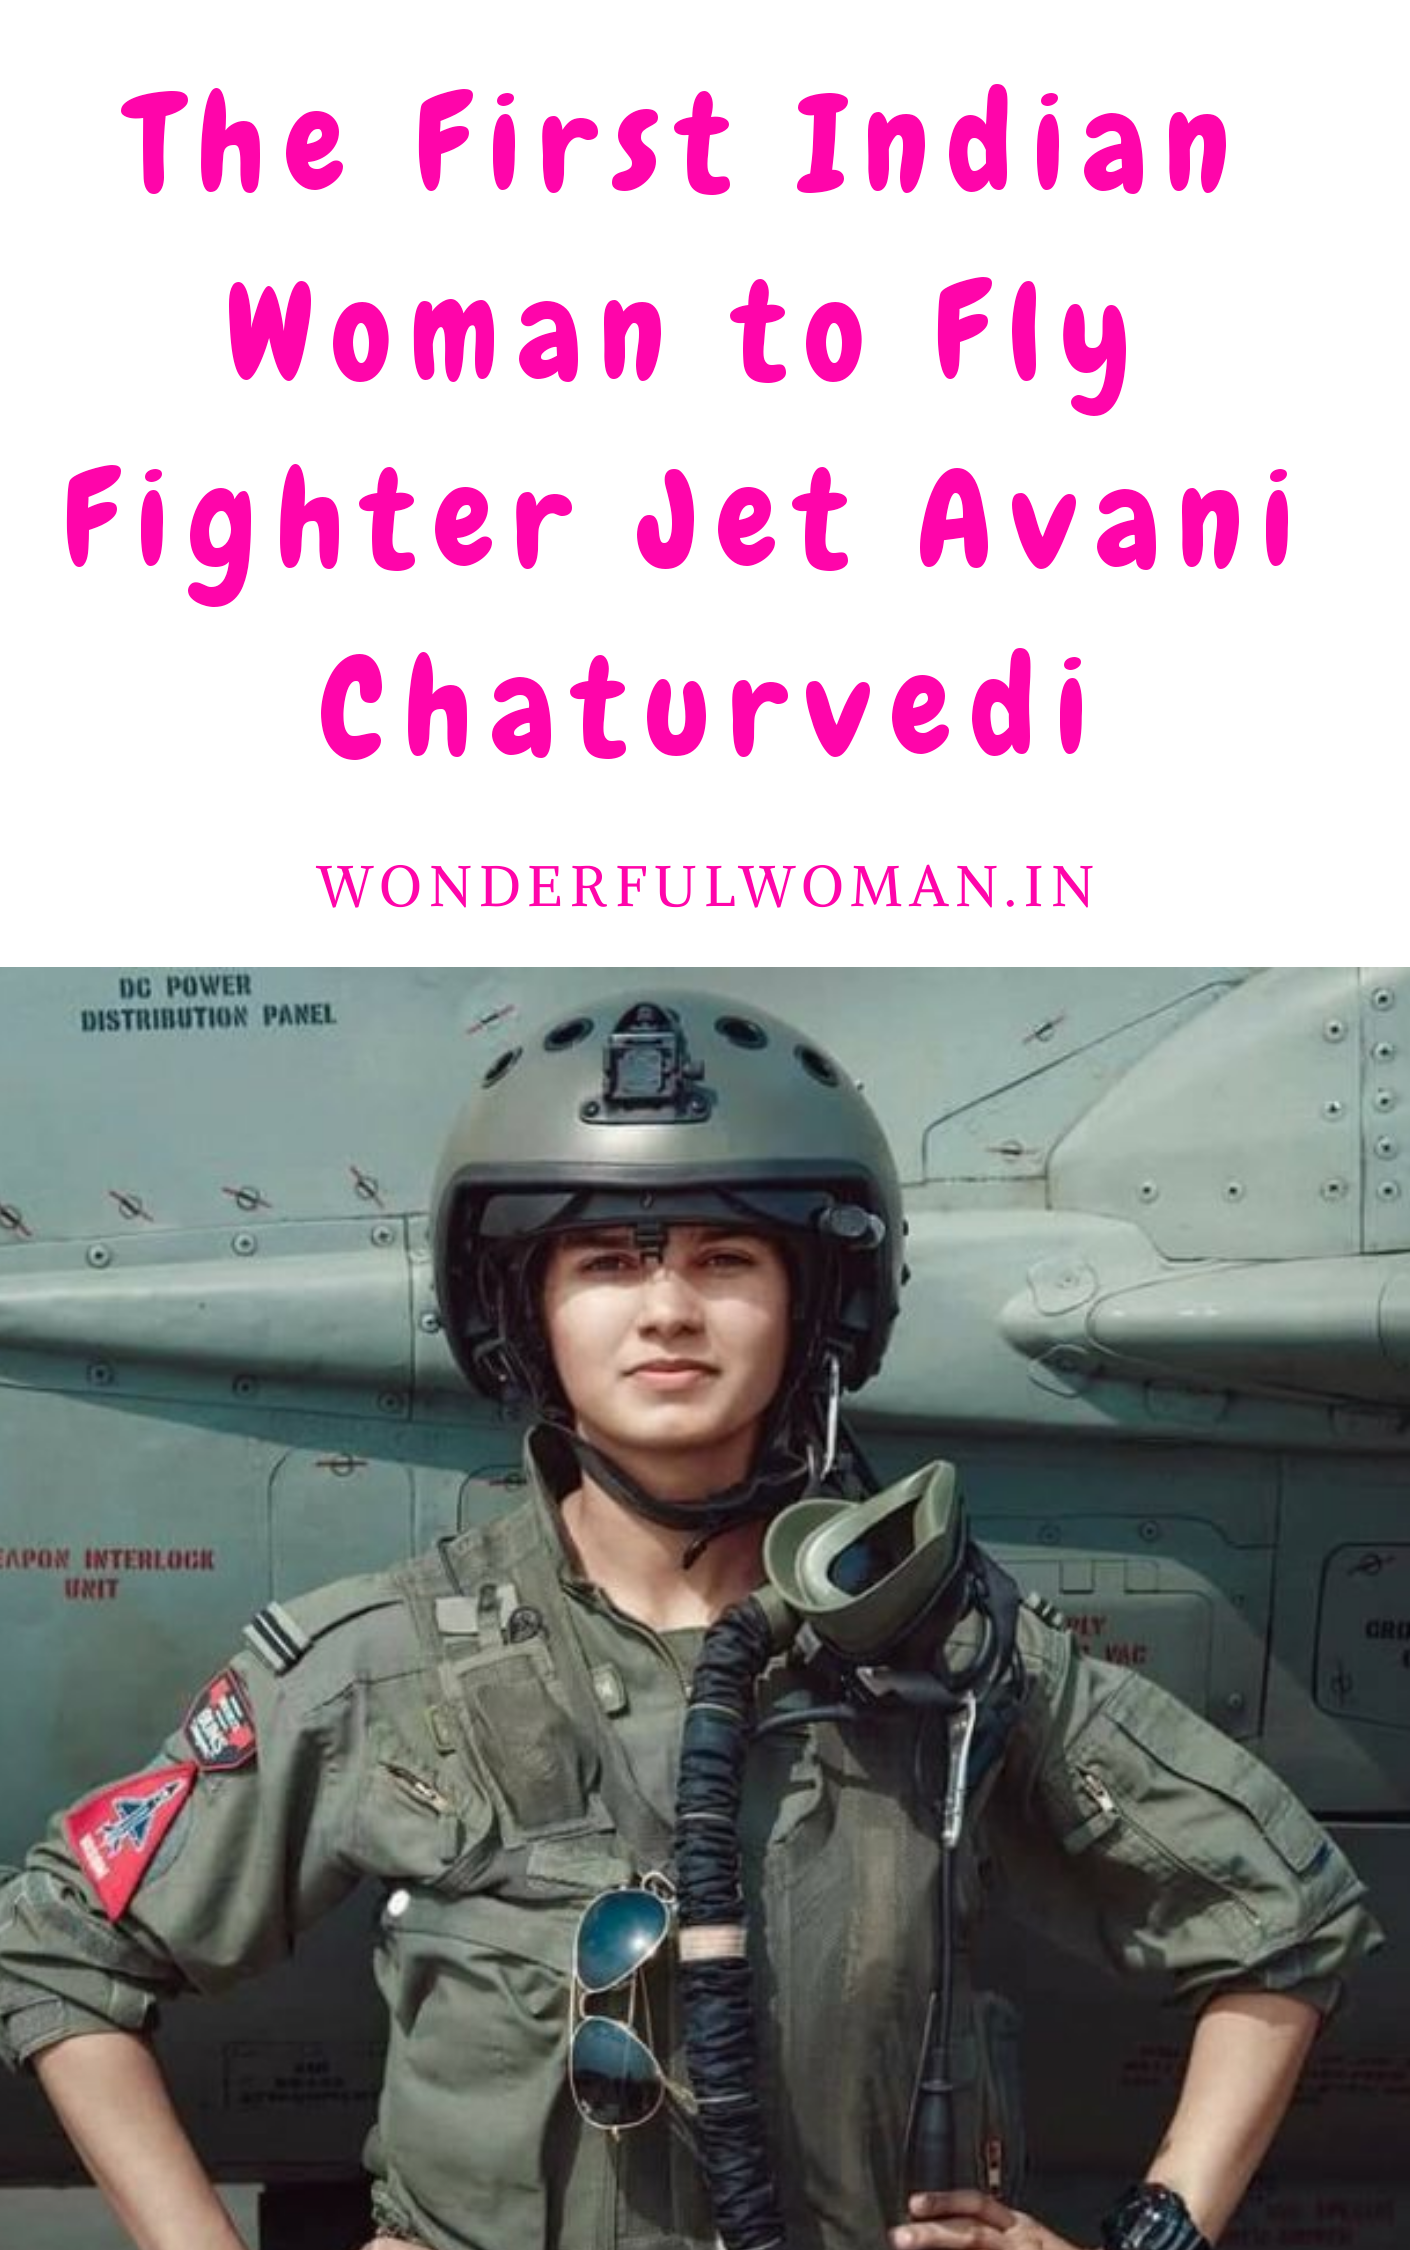 Meet Avani Chaturvedi: One of The First Indian Women to Fly